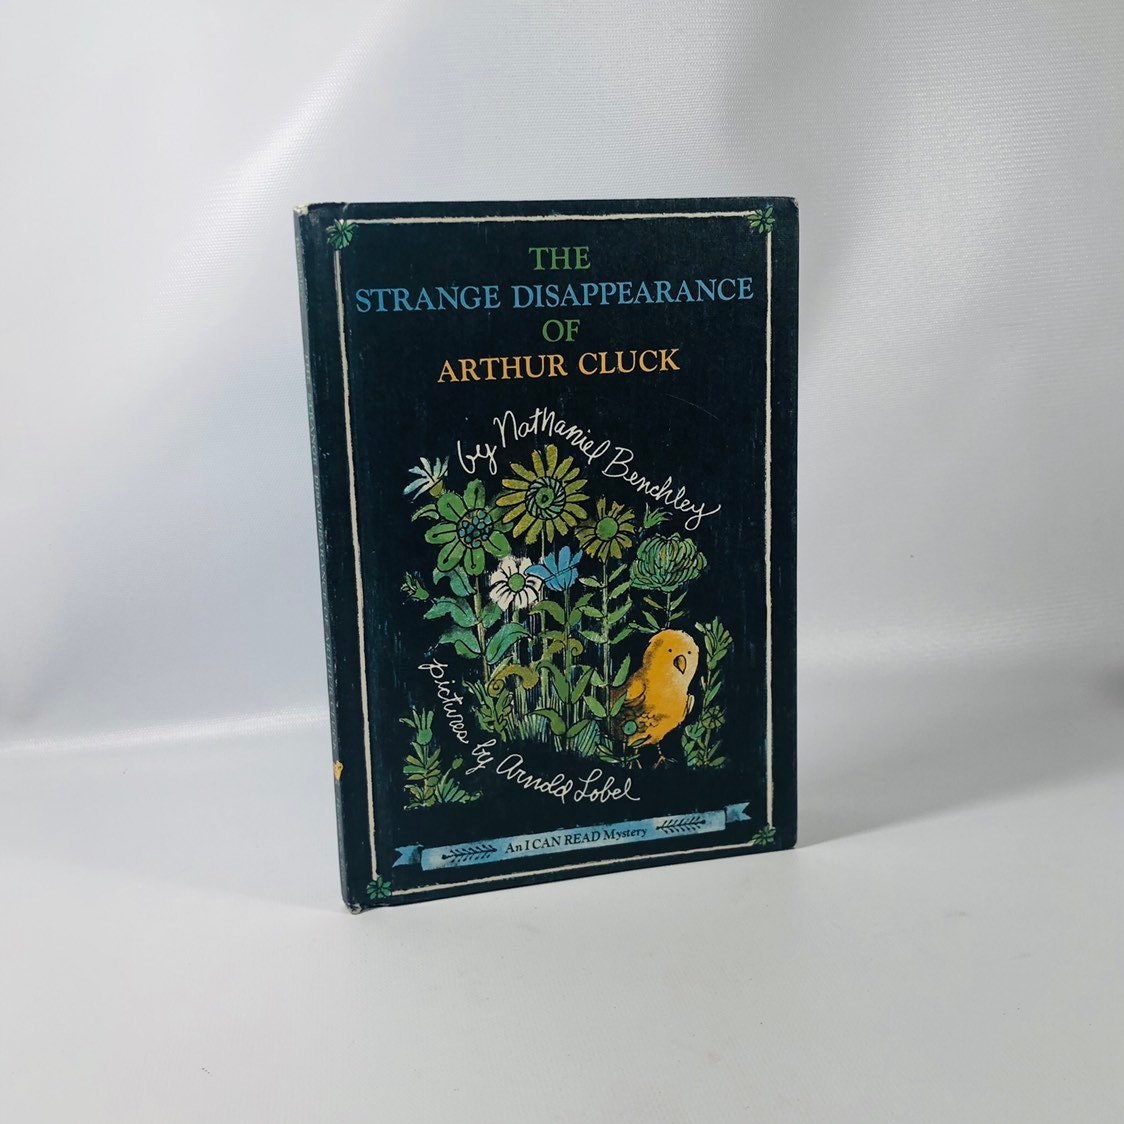 The Strange Disappearance of Arthur Cluck by Nathanial Benchley 1967 A Vintage I Can Read Mystery BookVintage Book